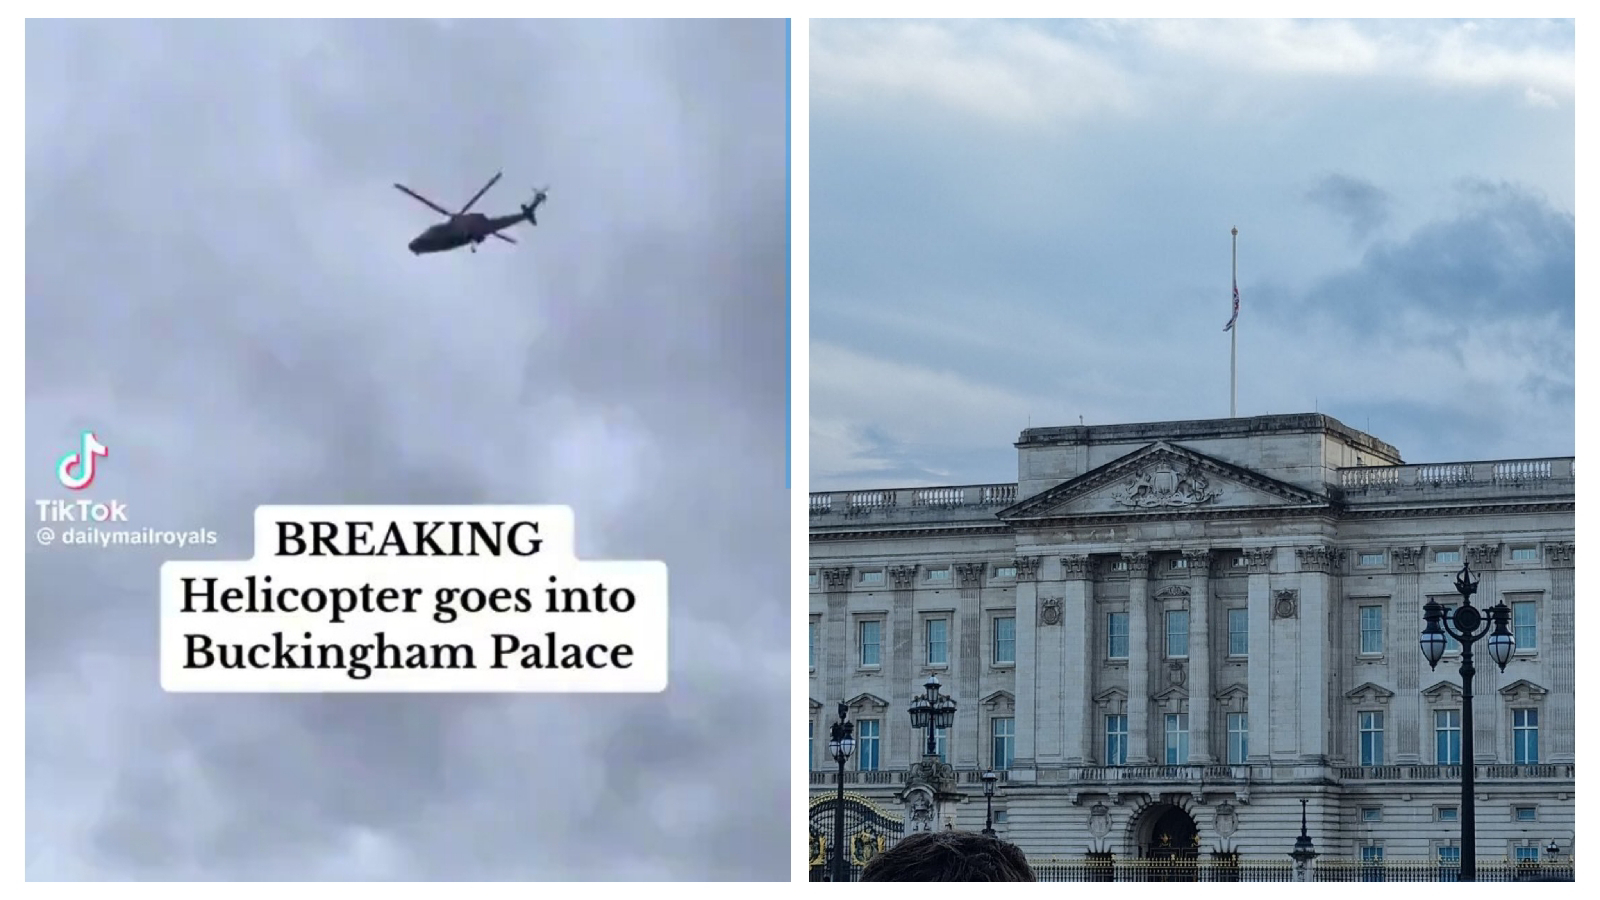 GOES VIDEO Helicopter carrying unknown passengers entering into Buckingham Palace